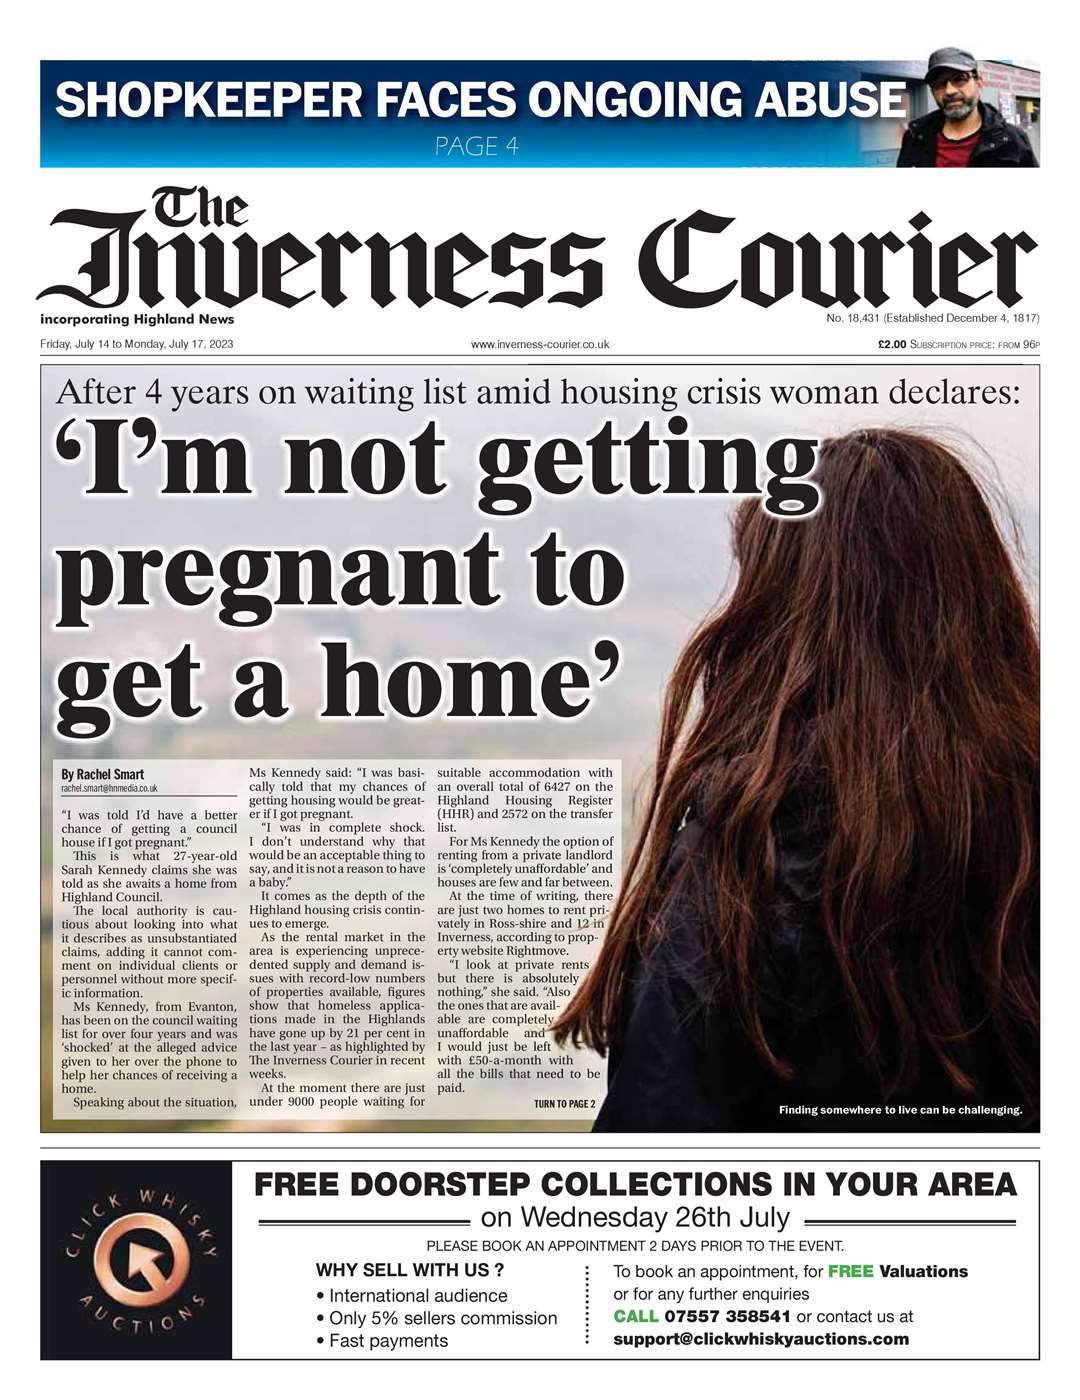 The Inverness Courier, July 14, front page.